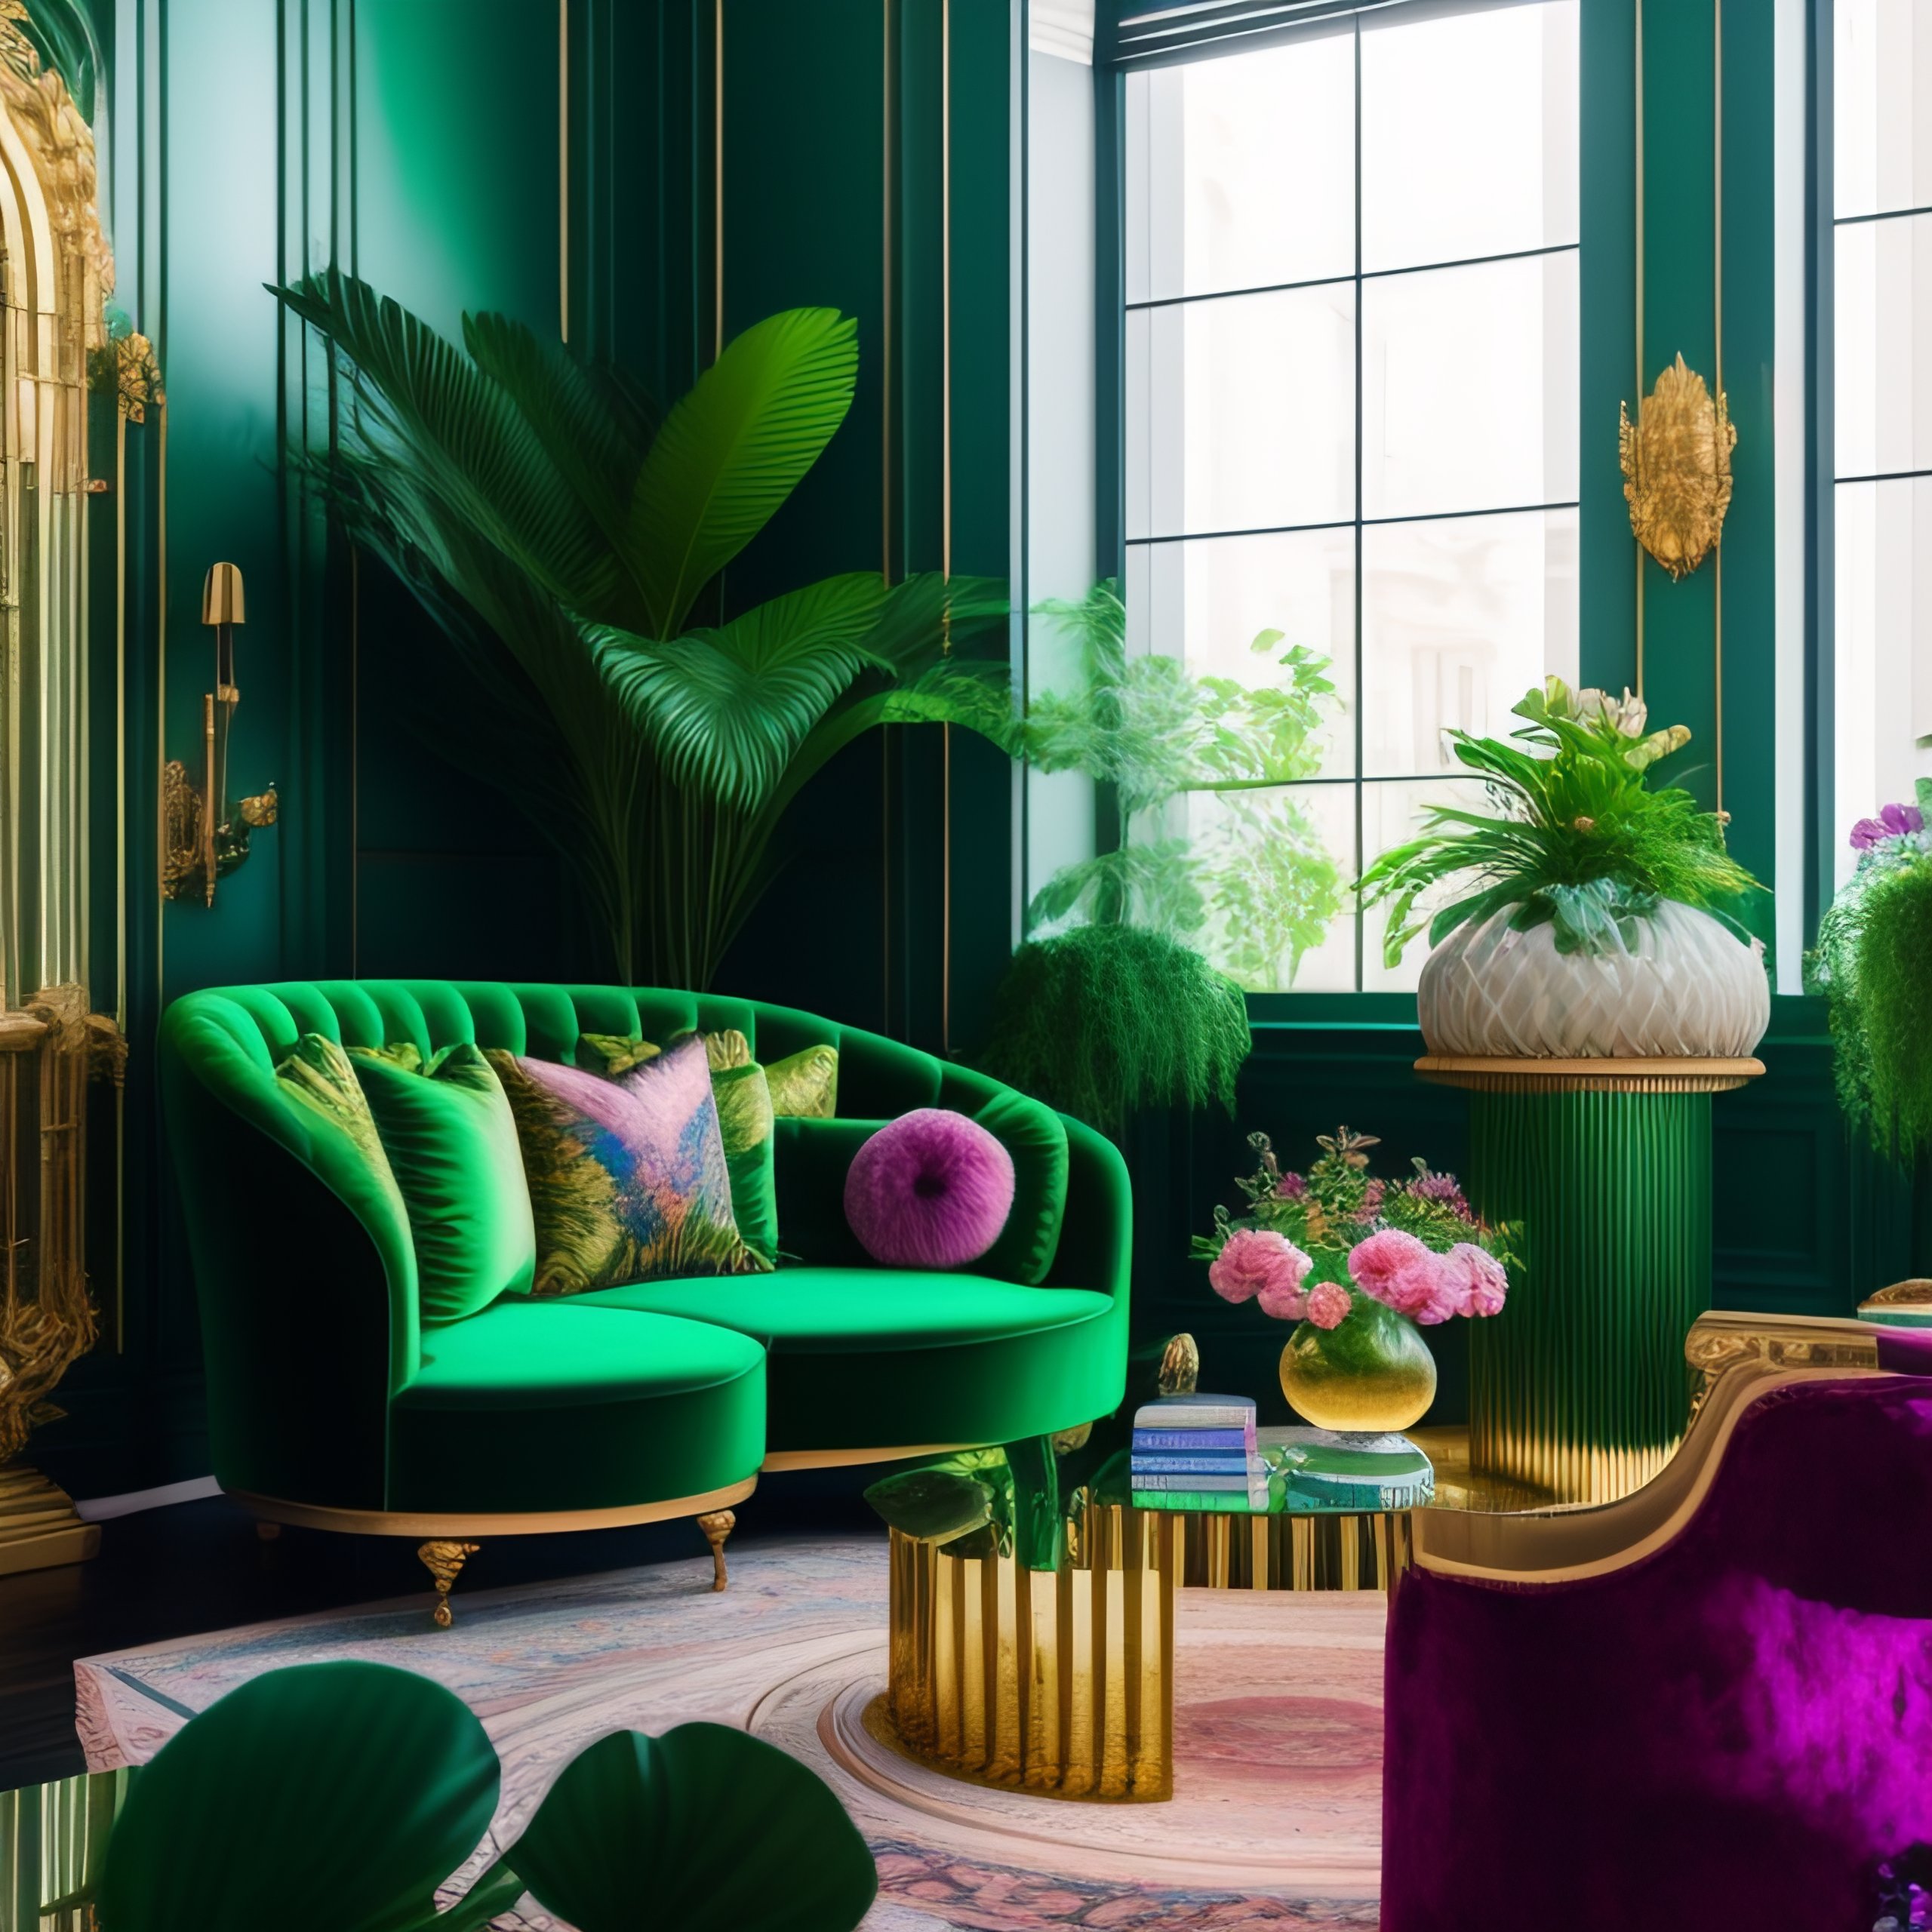 Lexica - Architectural Digest photo of a maximalist green {vaporwave ...